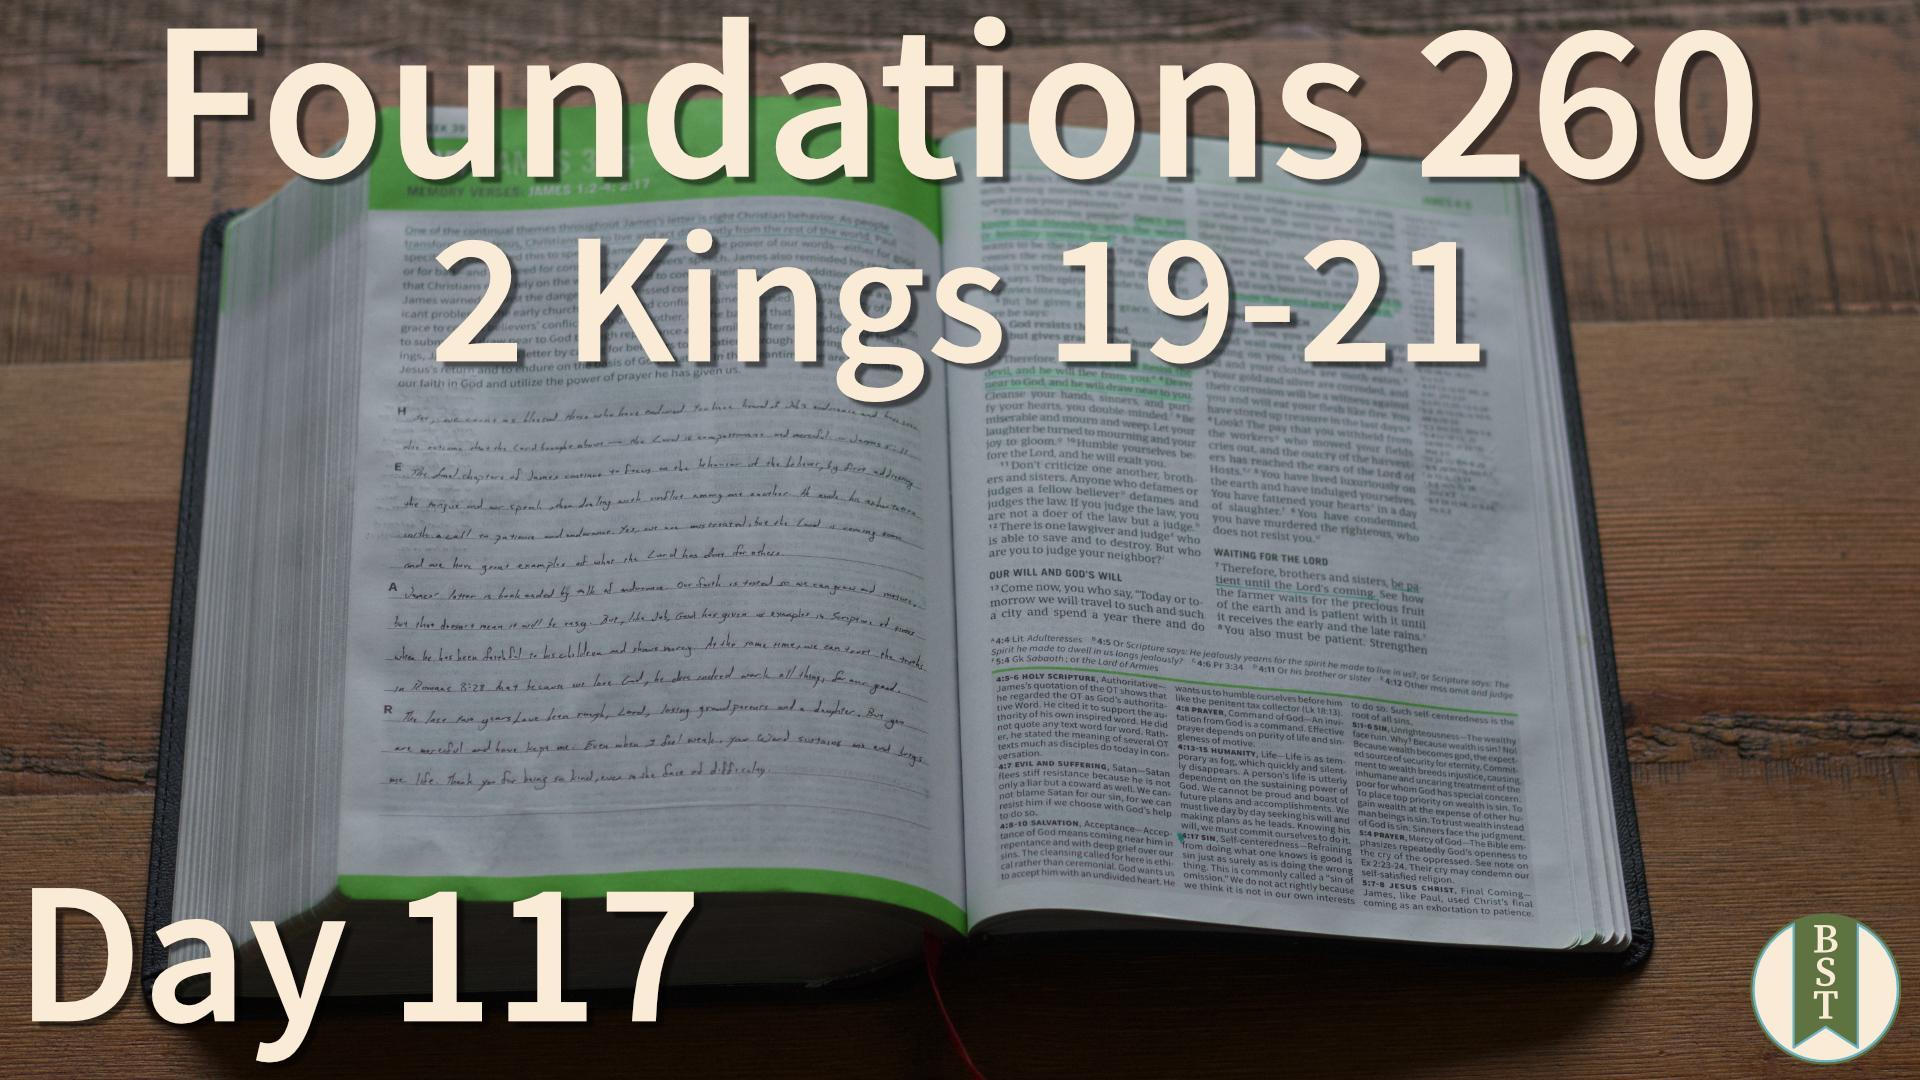 F260 Day 117: 2 Kings 19-21